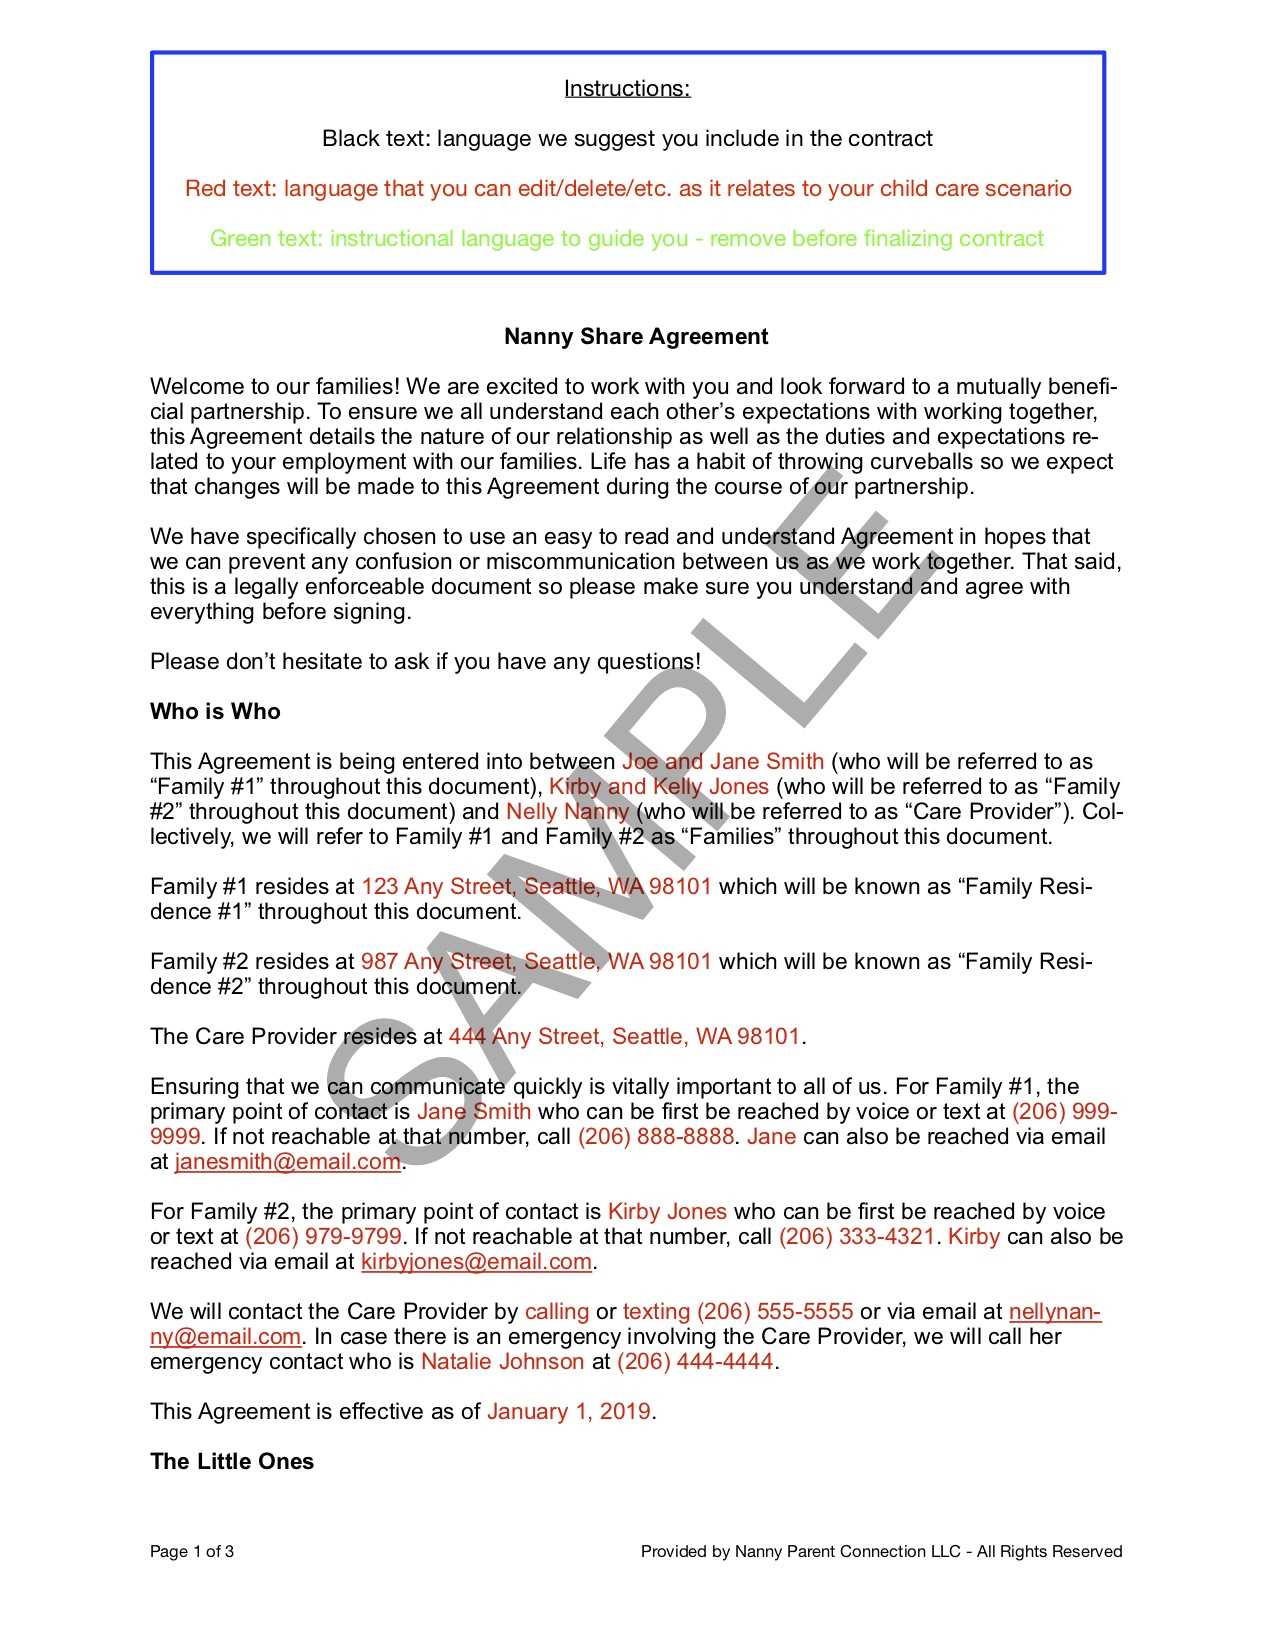 Easy To Understand" Nanny Share Contract | Nanny Parent With Regard To Nanny Contract Template Word